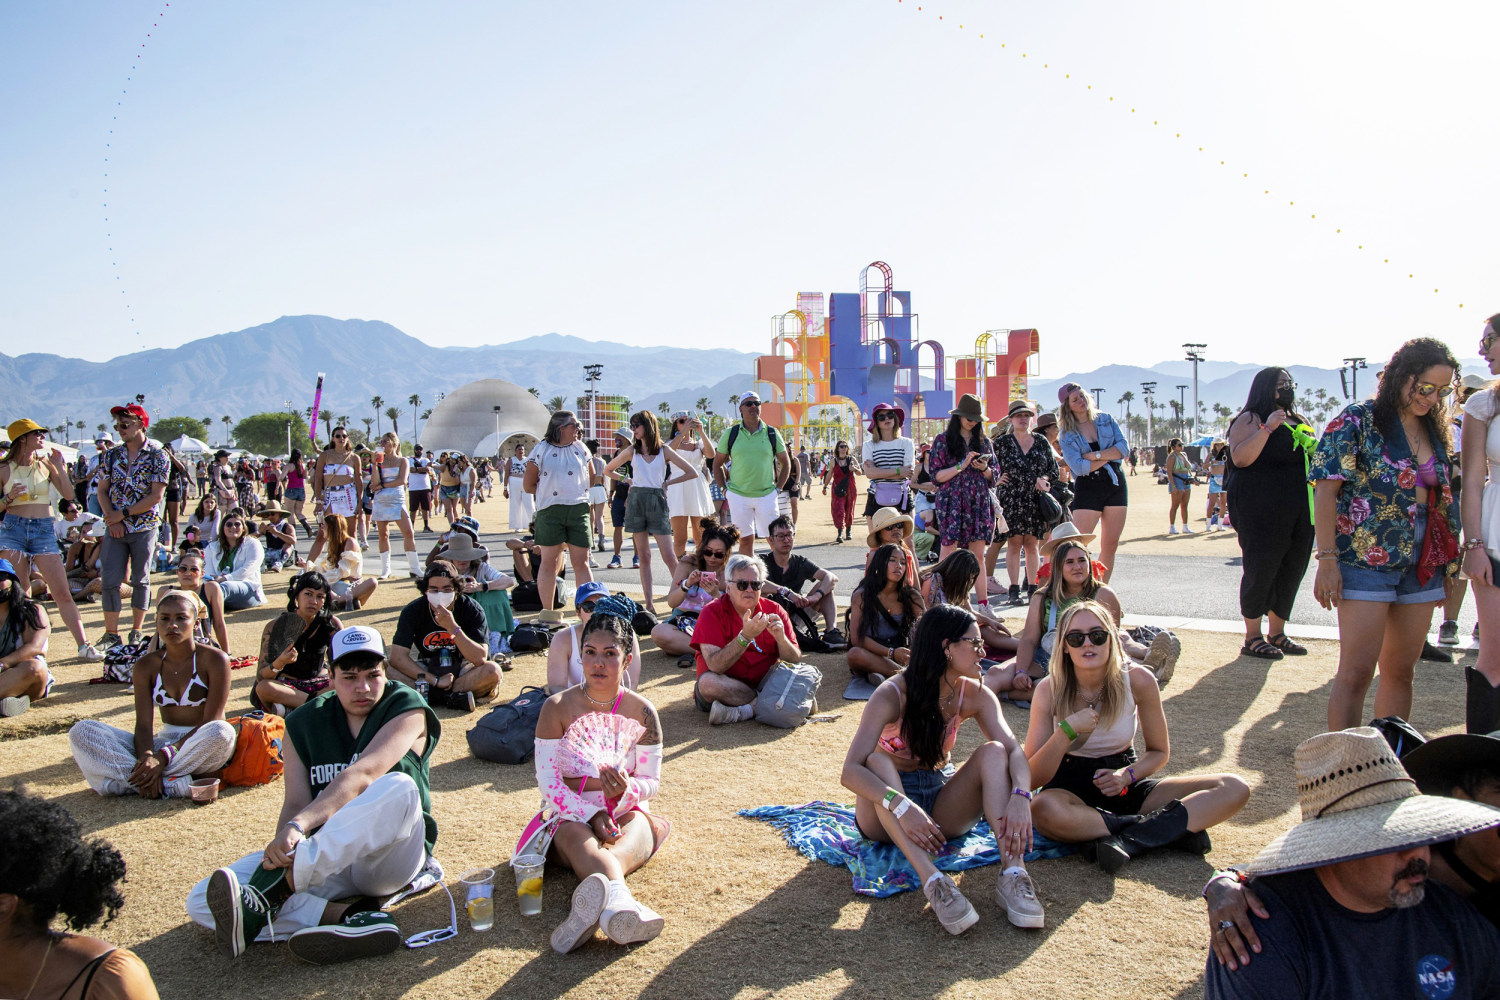 Omicron cases spike in Coachella Valley after music festival